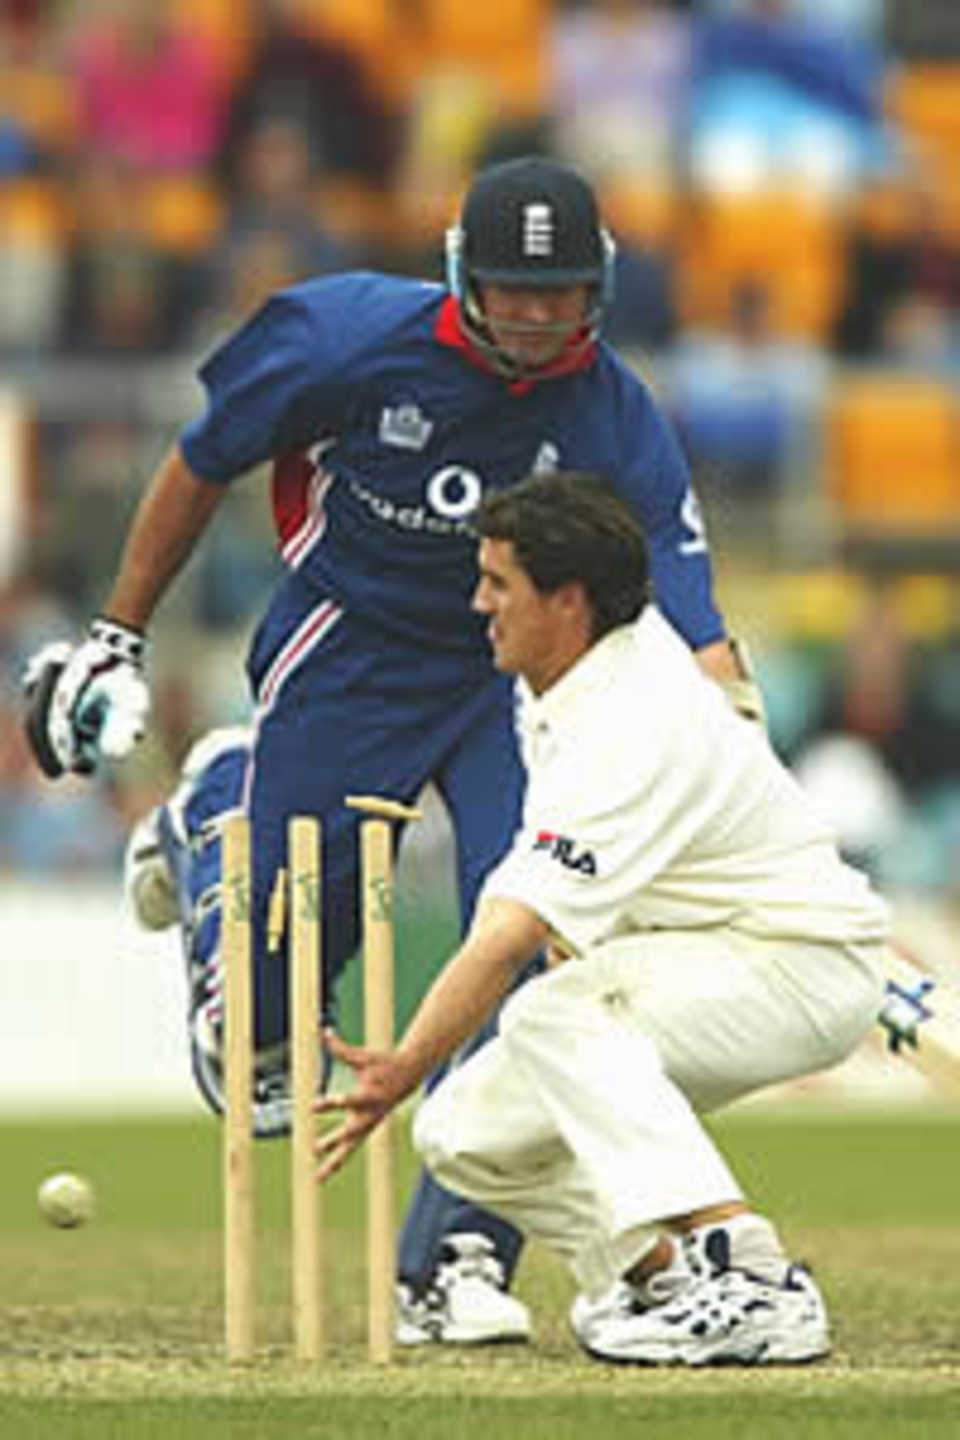 Carseldine attempts to run out Caddick, Prime Minister's XI v England XI, 2002/03